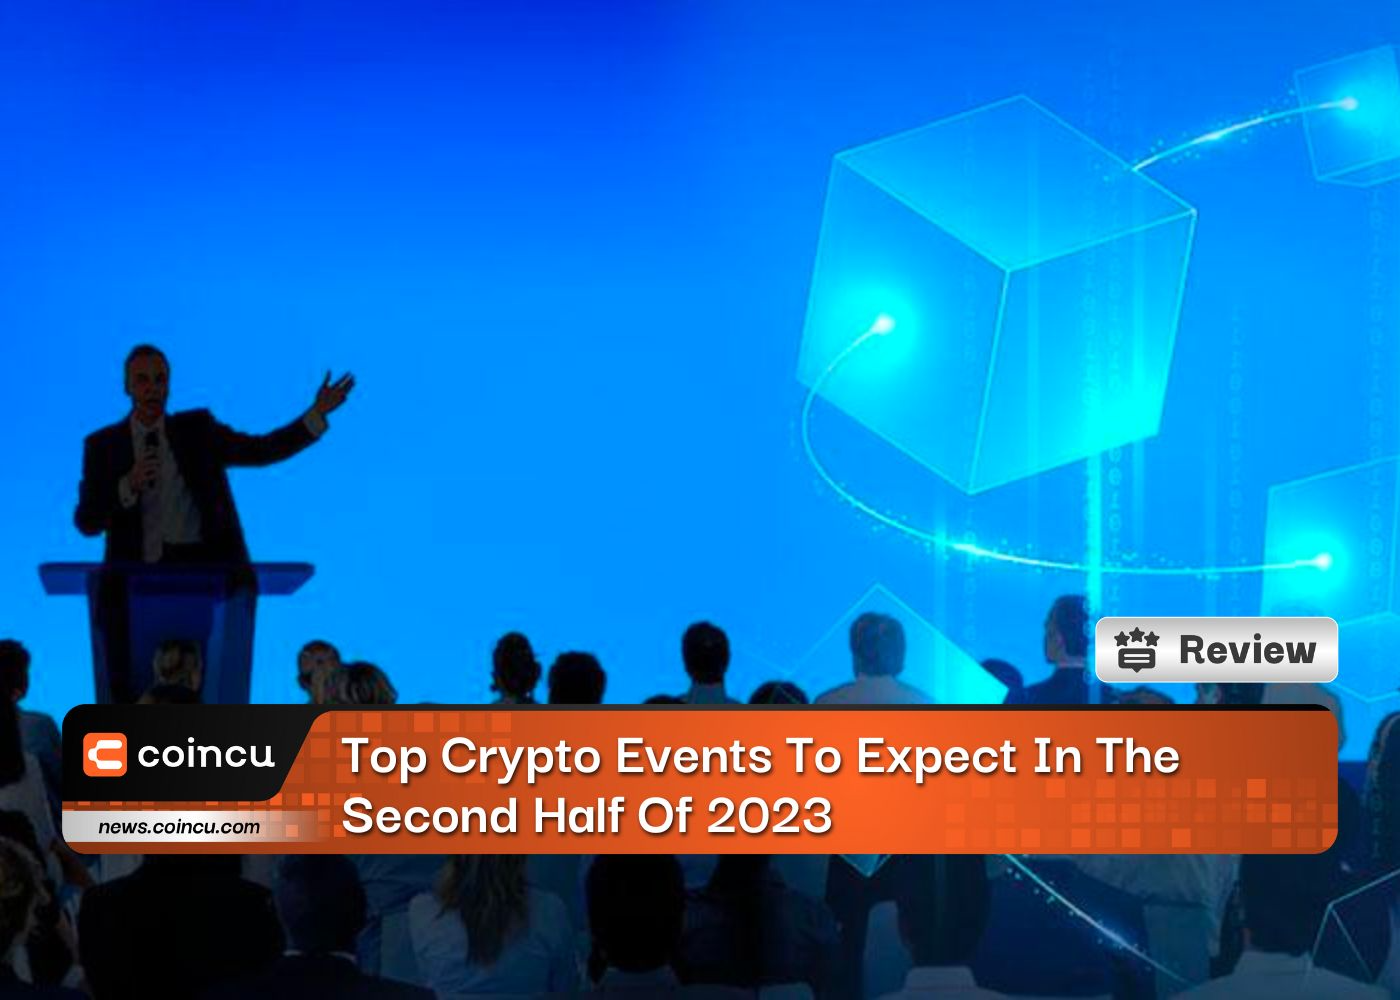 Top Crypto Events To Expect In The Second Half Of 2023